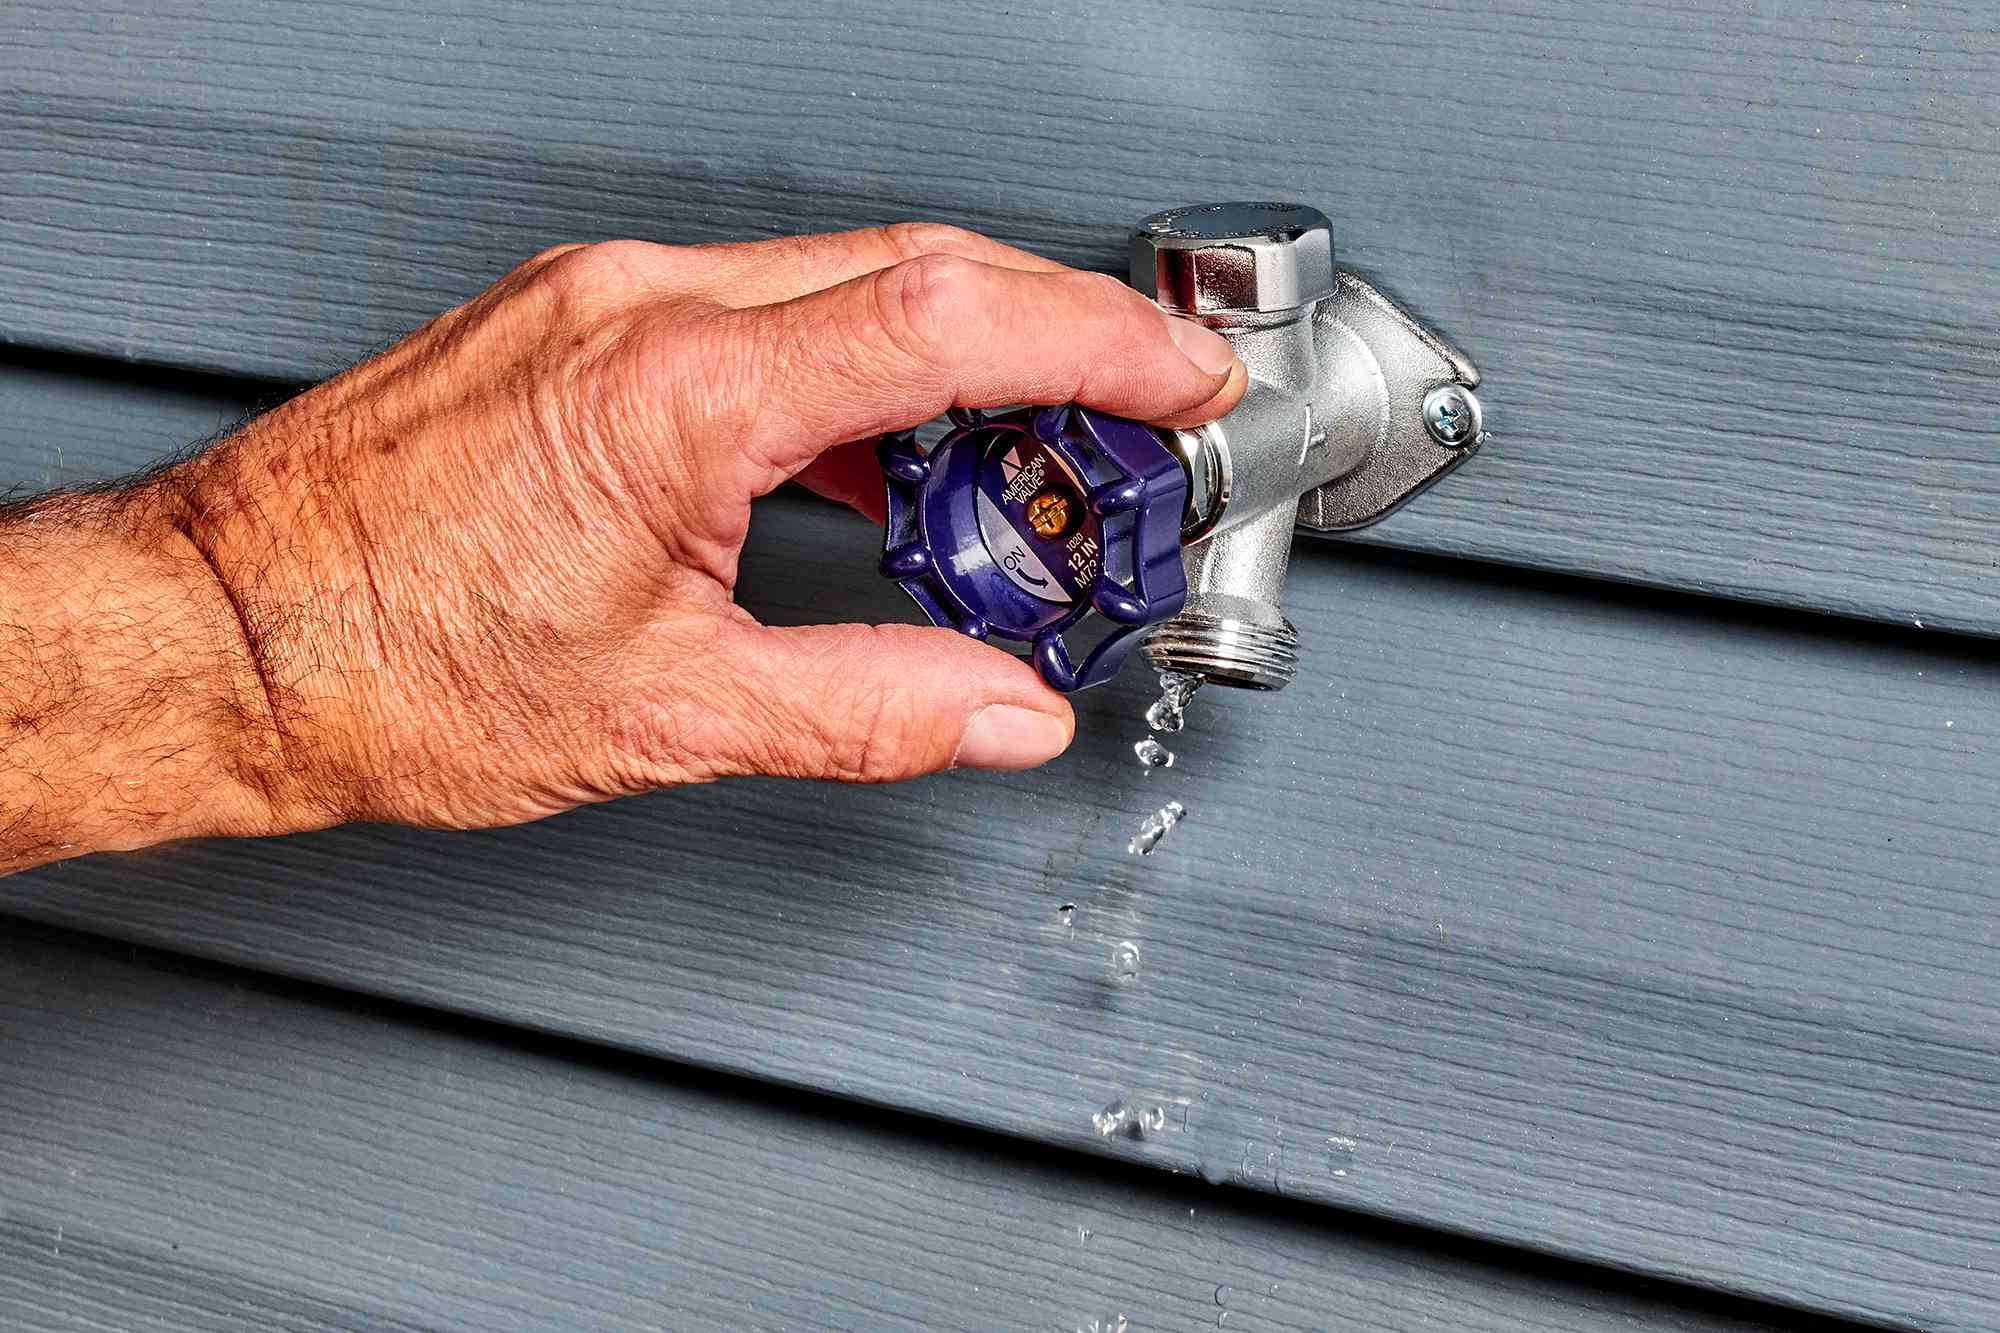 How To Replace An Outdoor Faucet Handle